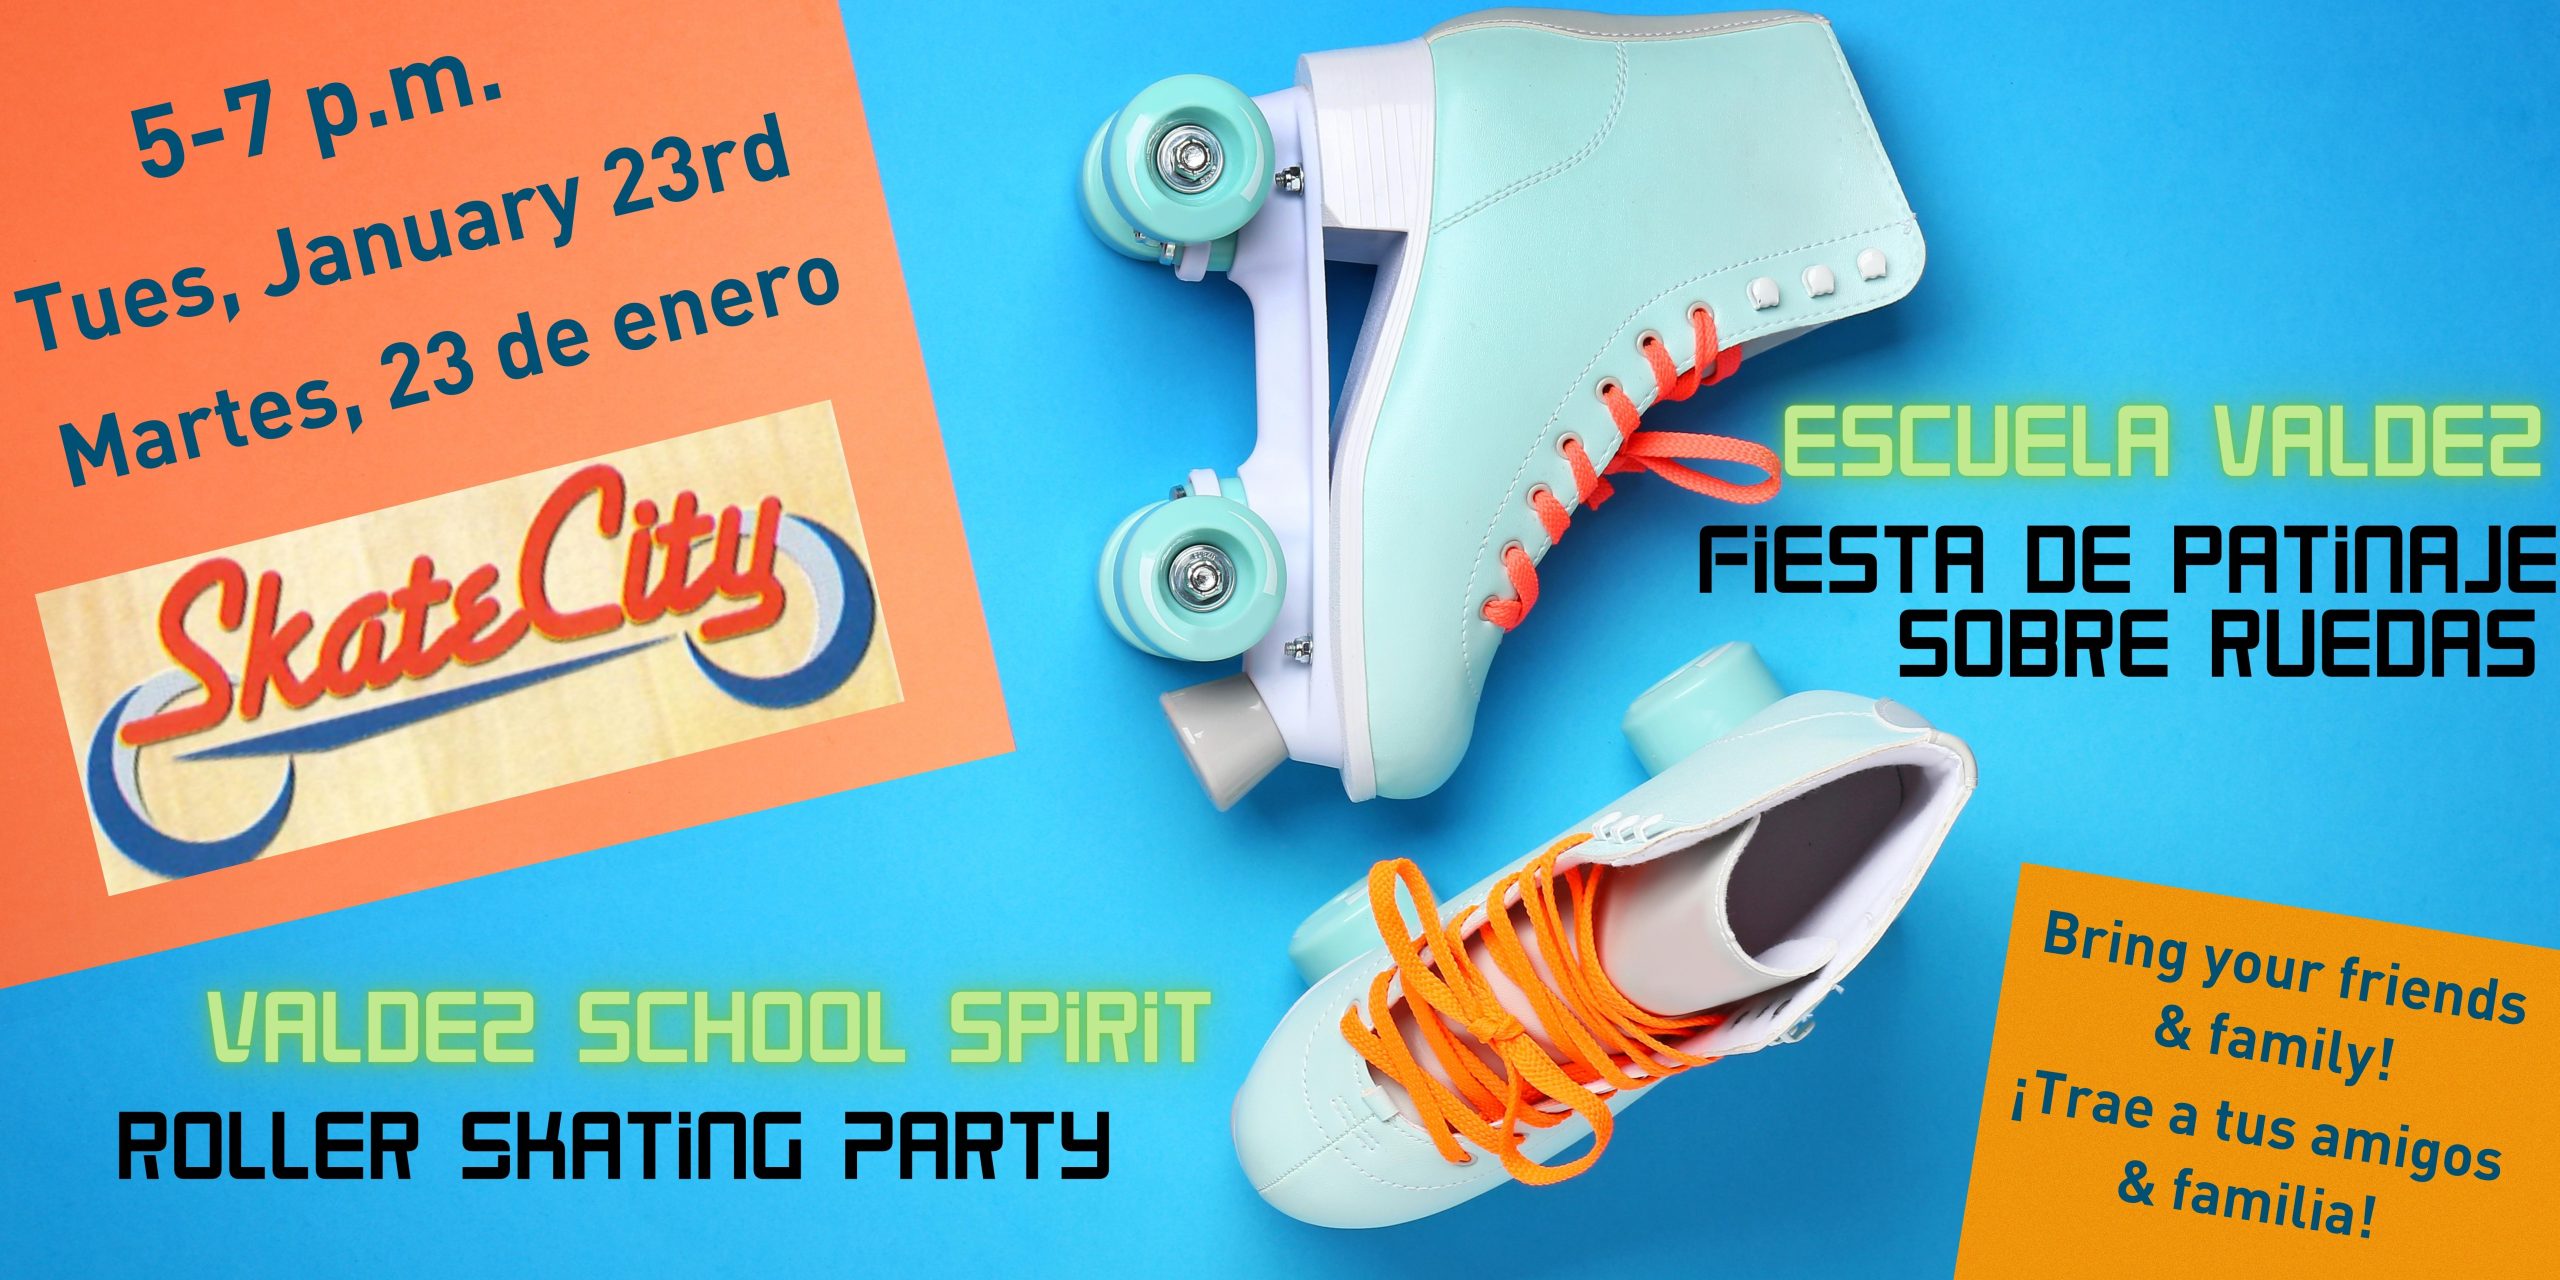 Blue background with a pair of light blue roller skates in the middle. Orange box in the upper left corner says in blue text, "5-7pm, Tuesday, January 23rd, Martes, 23 de enero" with a logo for Skate City. Bottom right corner has an orange box with blue text that says, "Bring your family & friends!" and "¡Trae a tus amigos y familia!" Green text says, "Valdez Elementary and Escuela Valdez." Black text says, "Skating Party" and "Fiesta de Patinaje Sobre Ruedas"